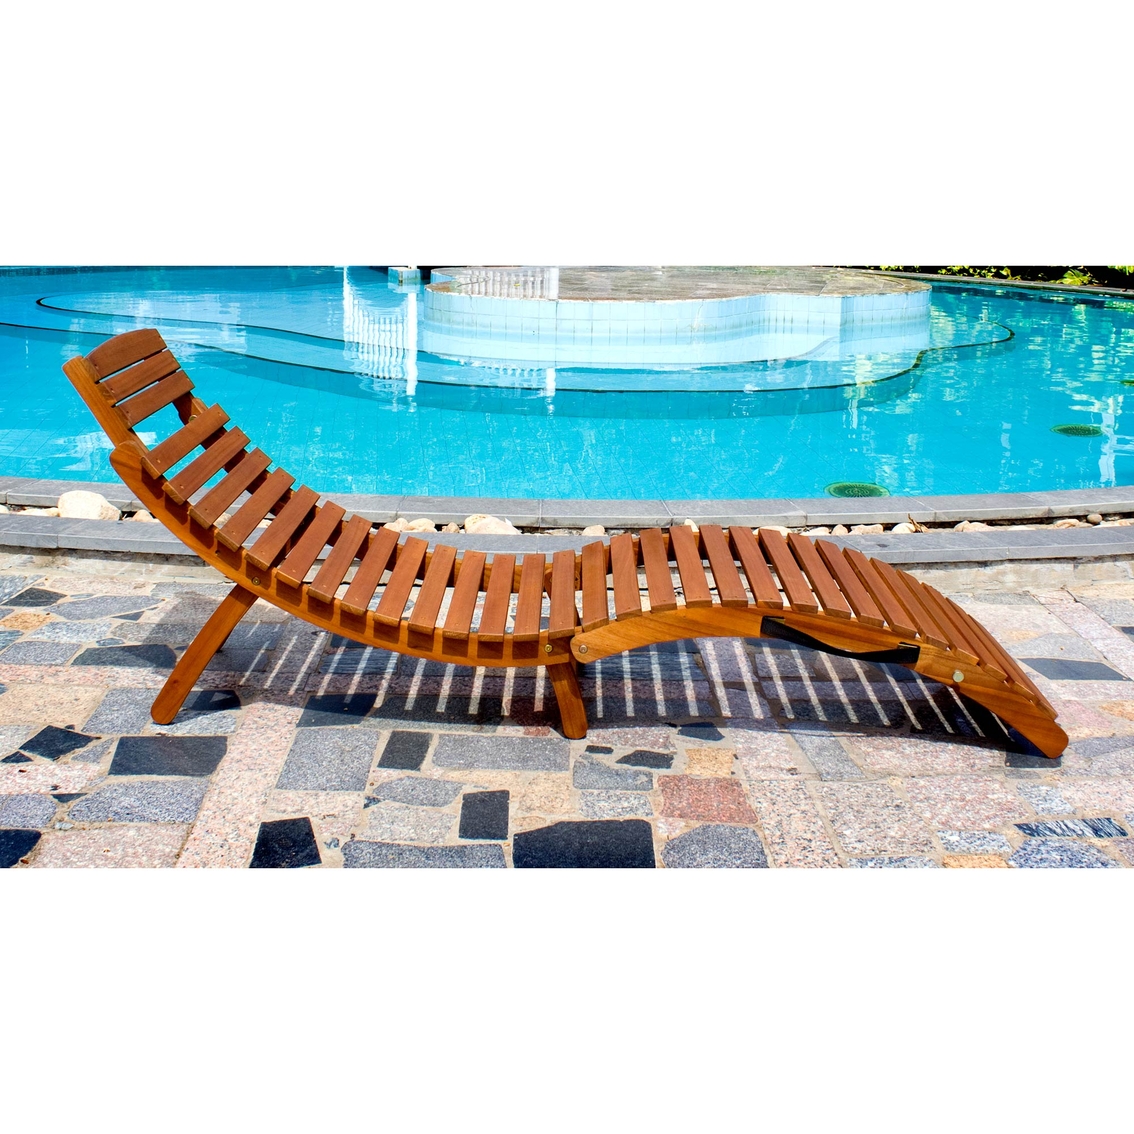 Northbeam Curved Folding Chaise Lounger - Image 3 of 4